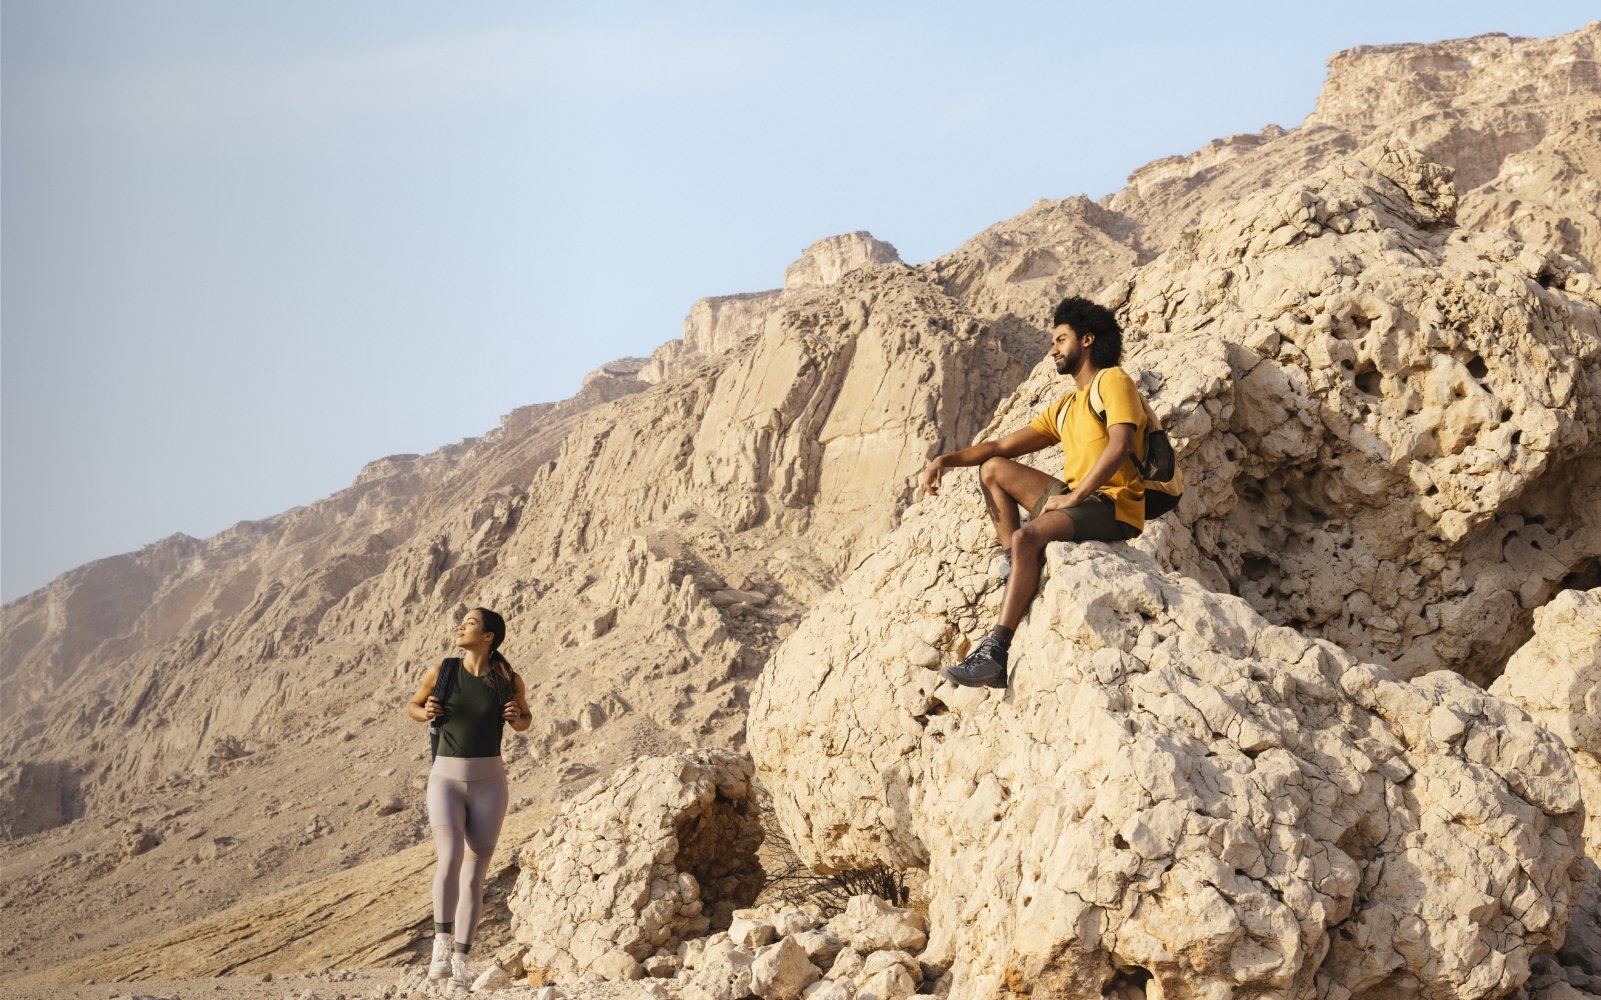 Western couple hiking in the mountains in Jebel Hafit Desert Park